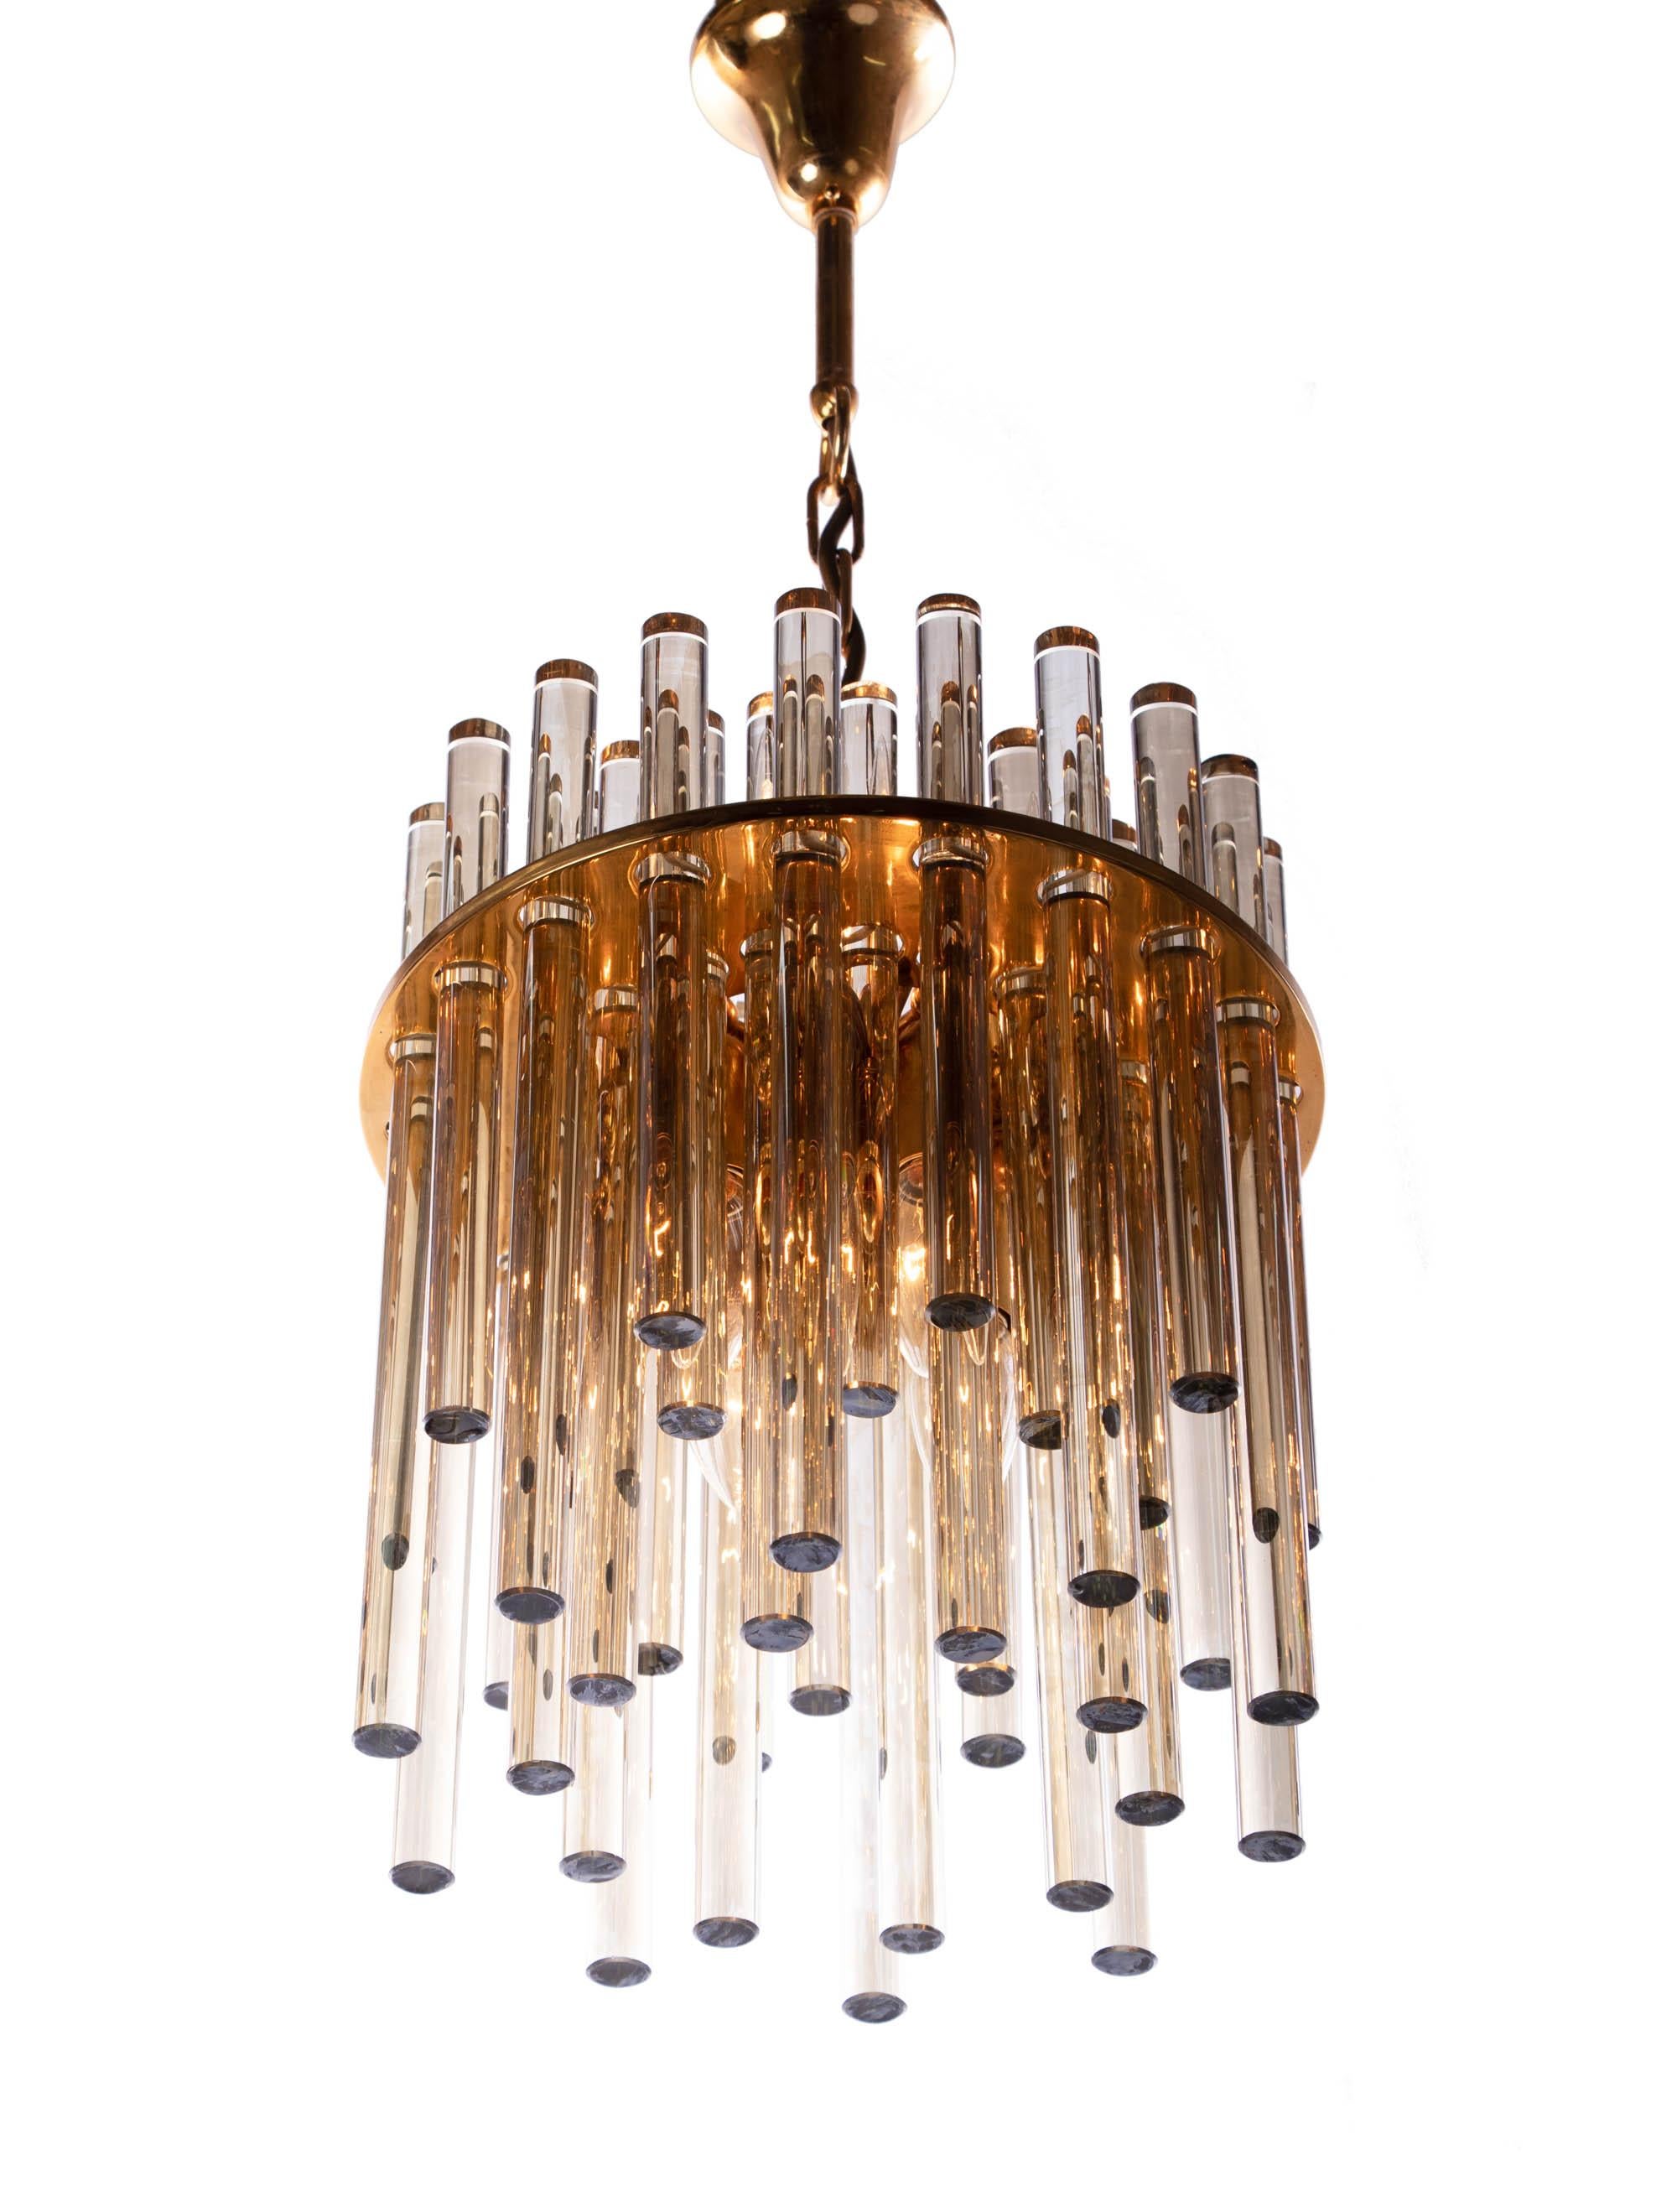 Elegant pendant lamp with smoked amber Murano glass rods on a gilded brass frame. Chandelier illuminates beautifully and offers a lot of light. Designed by Palme & Walter for Palwa Lighting, Germany in the 1960s. 

Design: Christoph Palme.